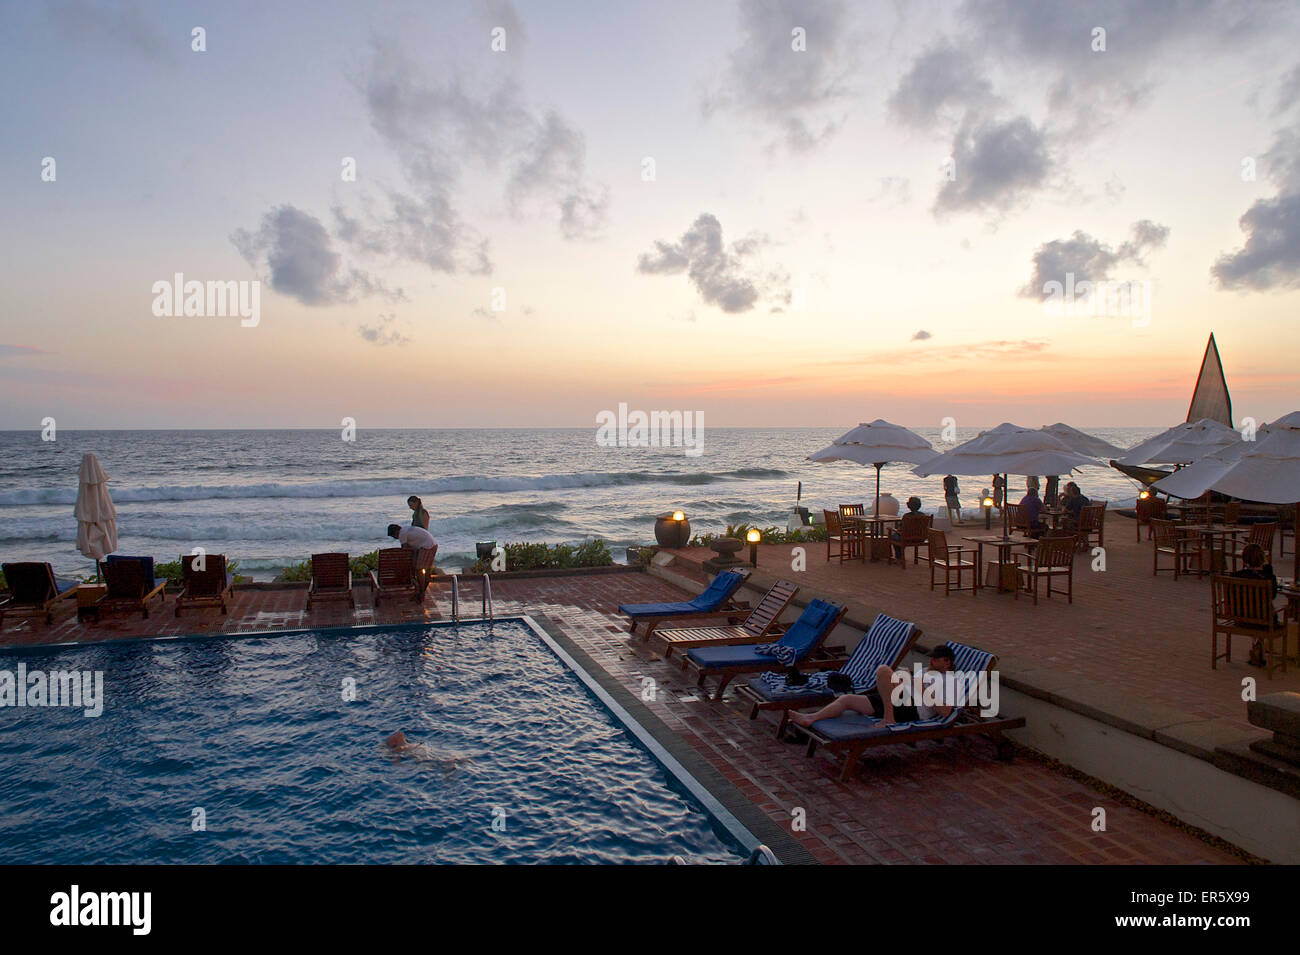 People around the pool with sea view at dusk at the Galle Face Hotel, Colombo, Sri Lanka Stock Photo